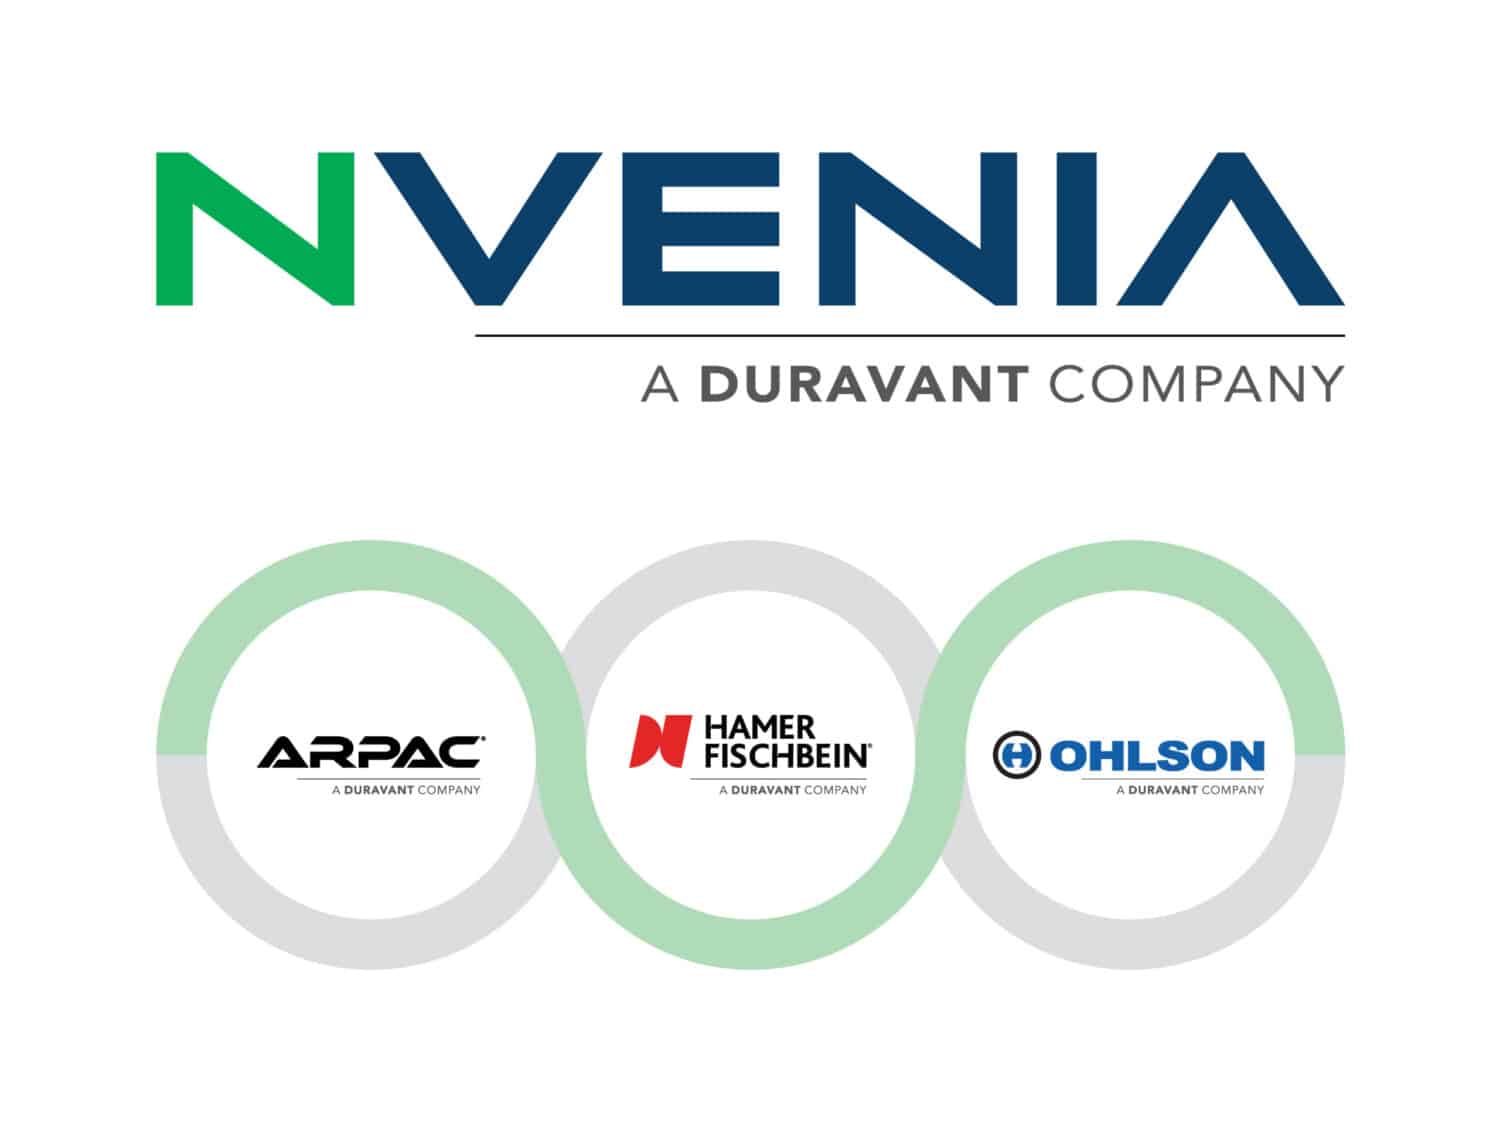 nvenia, arpac, hamer fischbein and ohlson logos